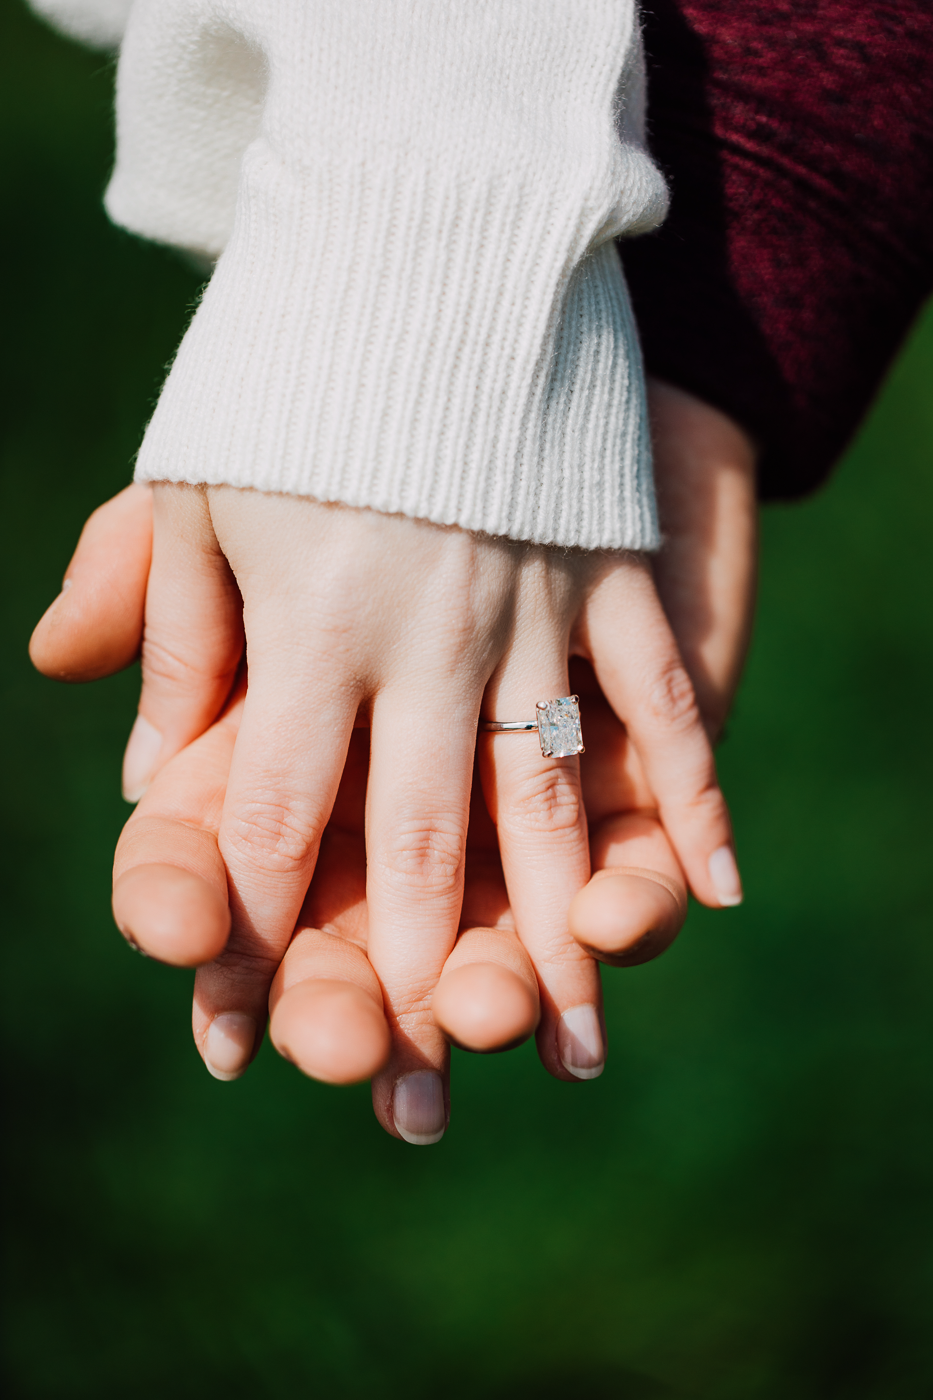  Close up of engaged couple holding hands with the engagement ring prominently displayed 